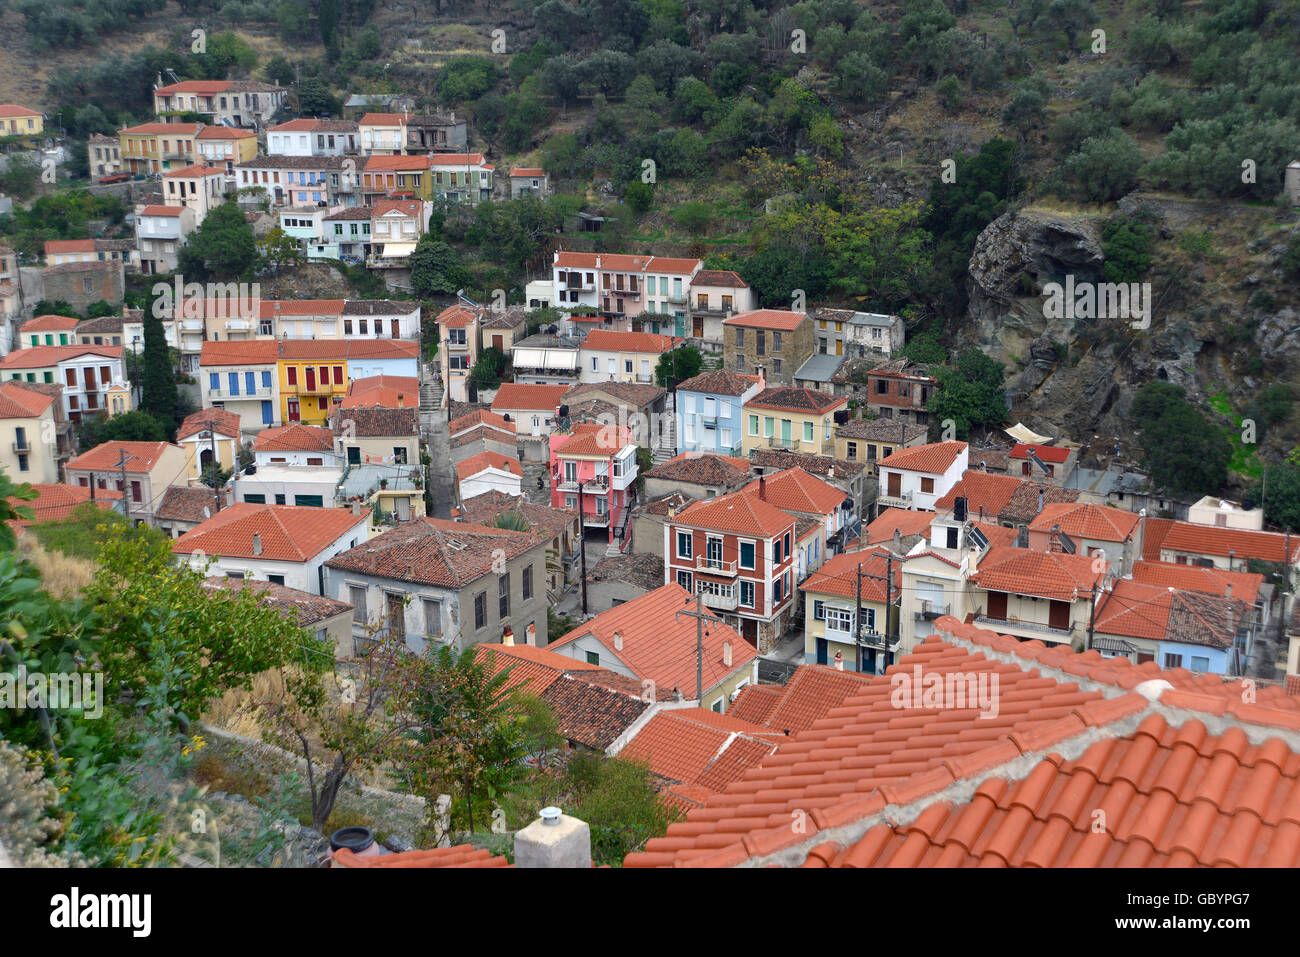 The picturesque town of Plomari, in Lesvos island, Greece Stock Photo